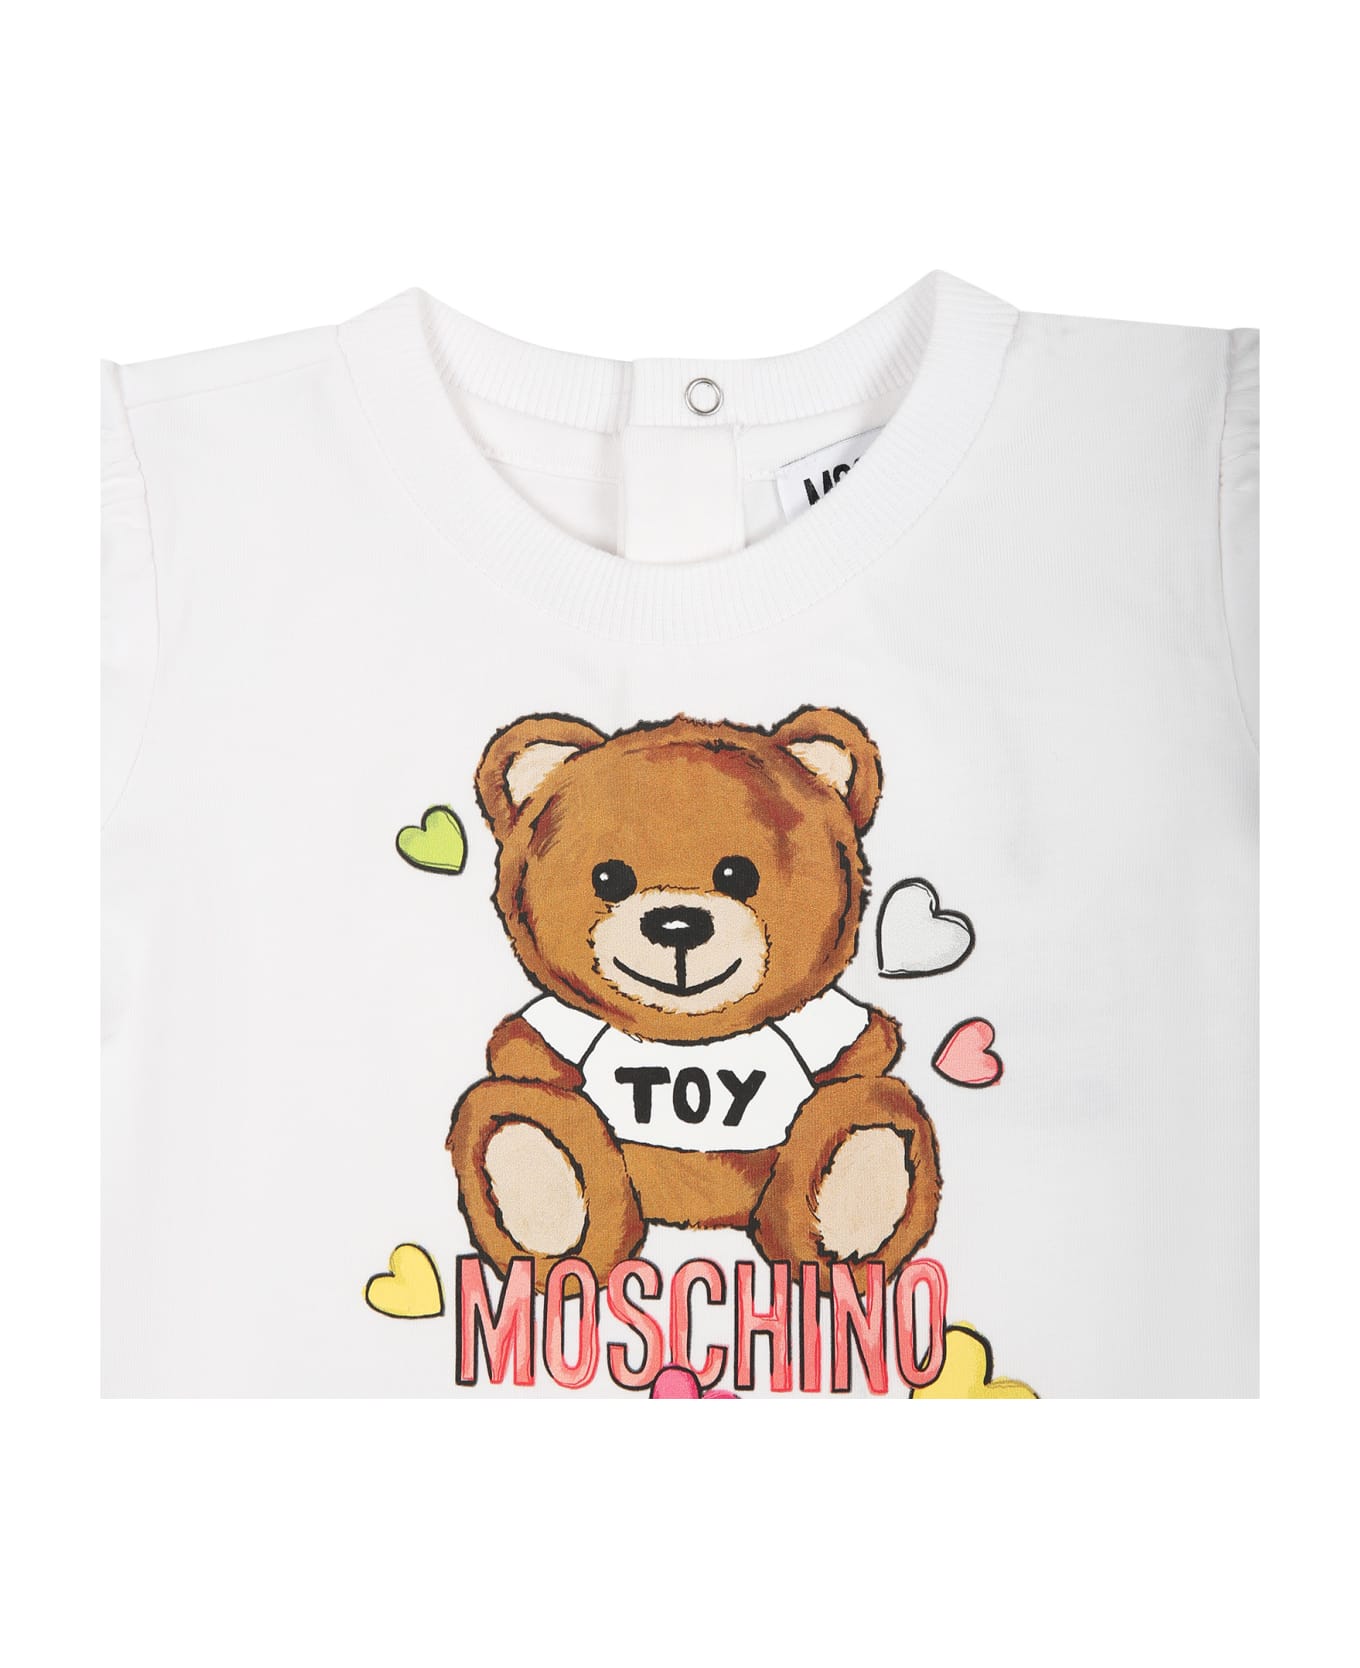 Moschino White Dress For Baby Girl With Teddy Bear Print - White ウェア